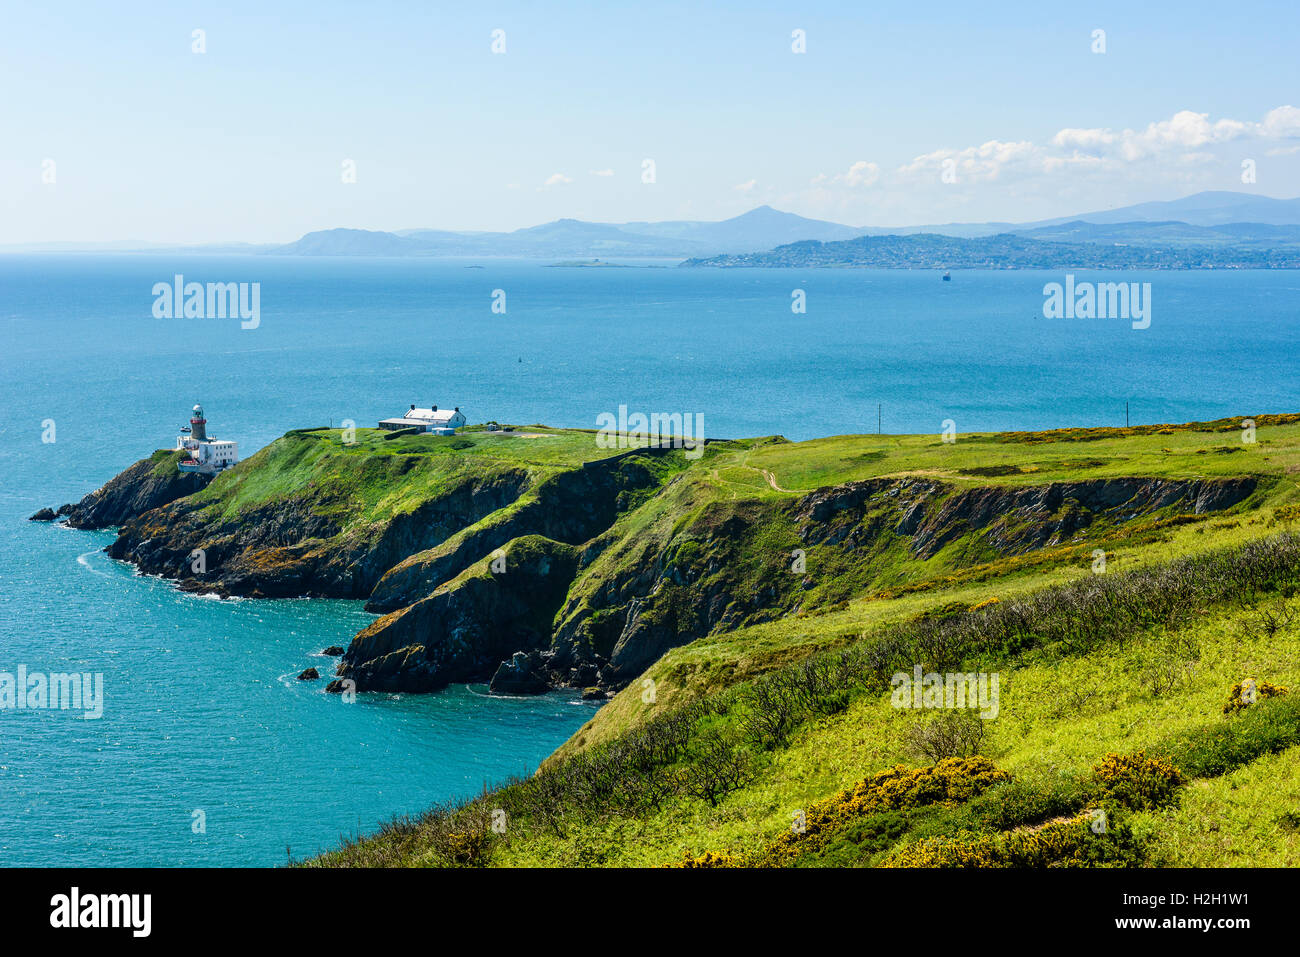 View from Howth Head across Dublin Bay Ireland, over Baily Lighthouse, Dalkey Head and Island to Wicklow Mountains on skyline Stock Photo